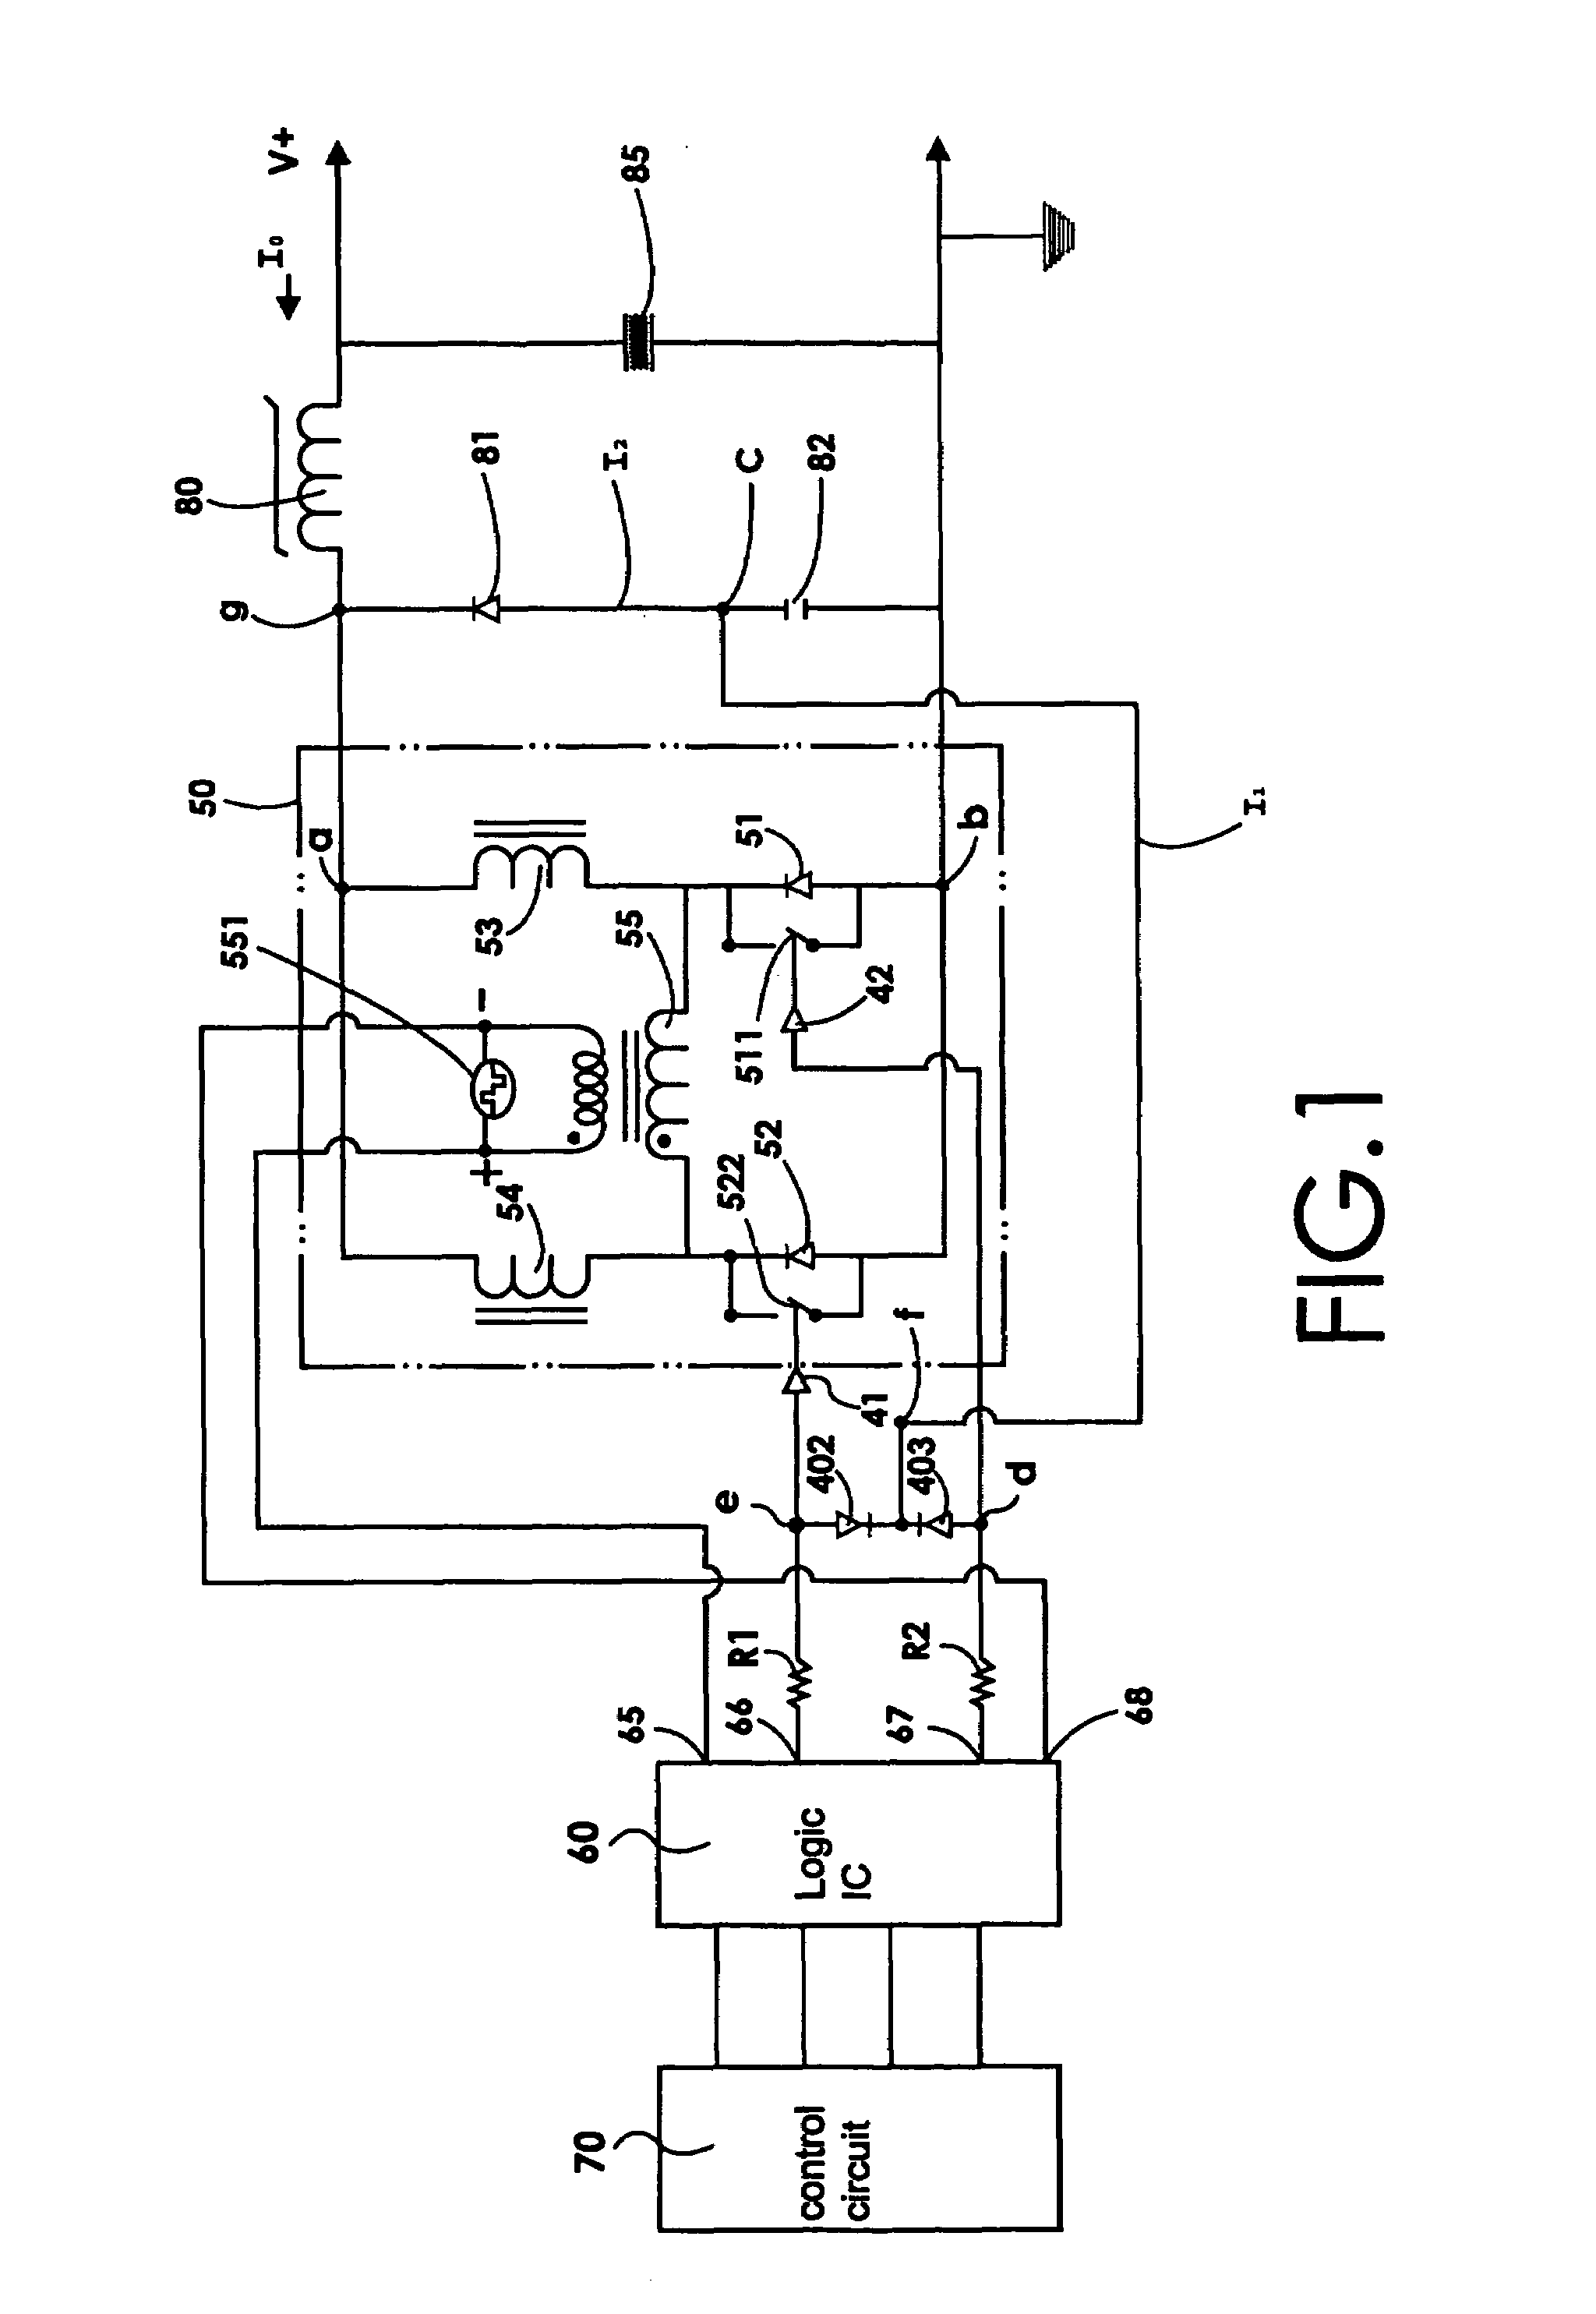 Synchronized rectifier filter control device for protecting a power supply from reverse current